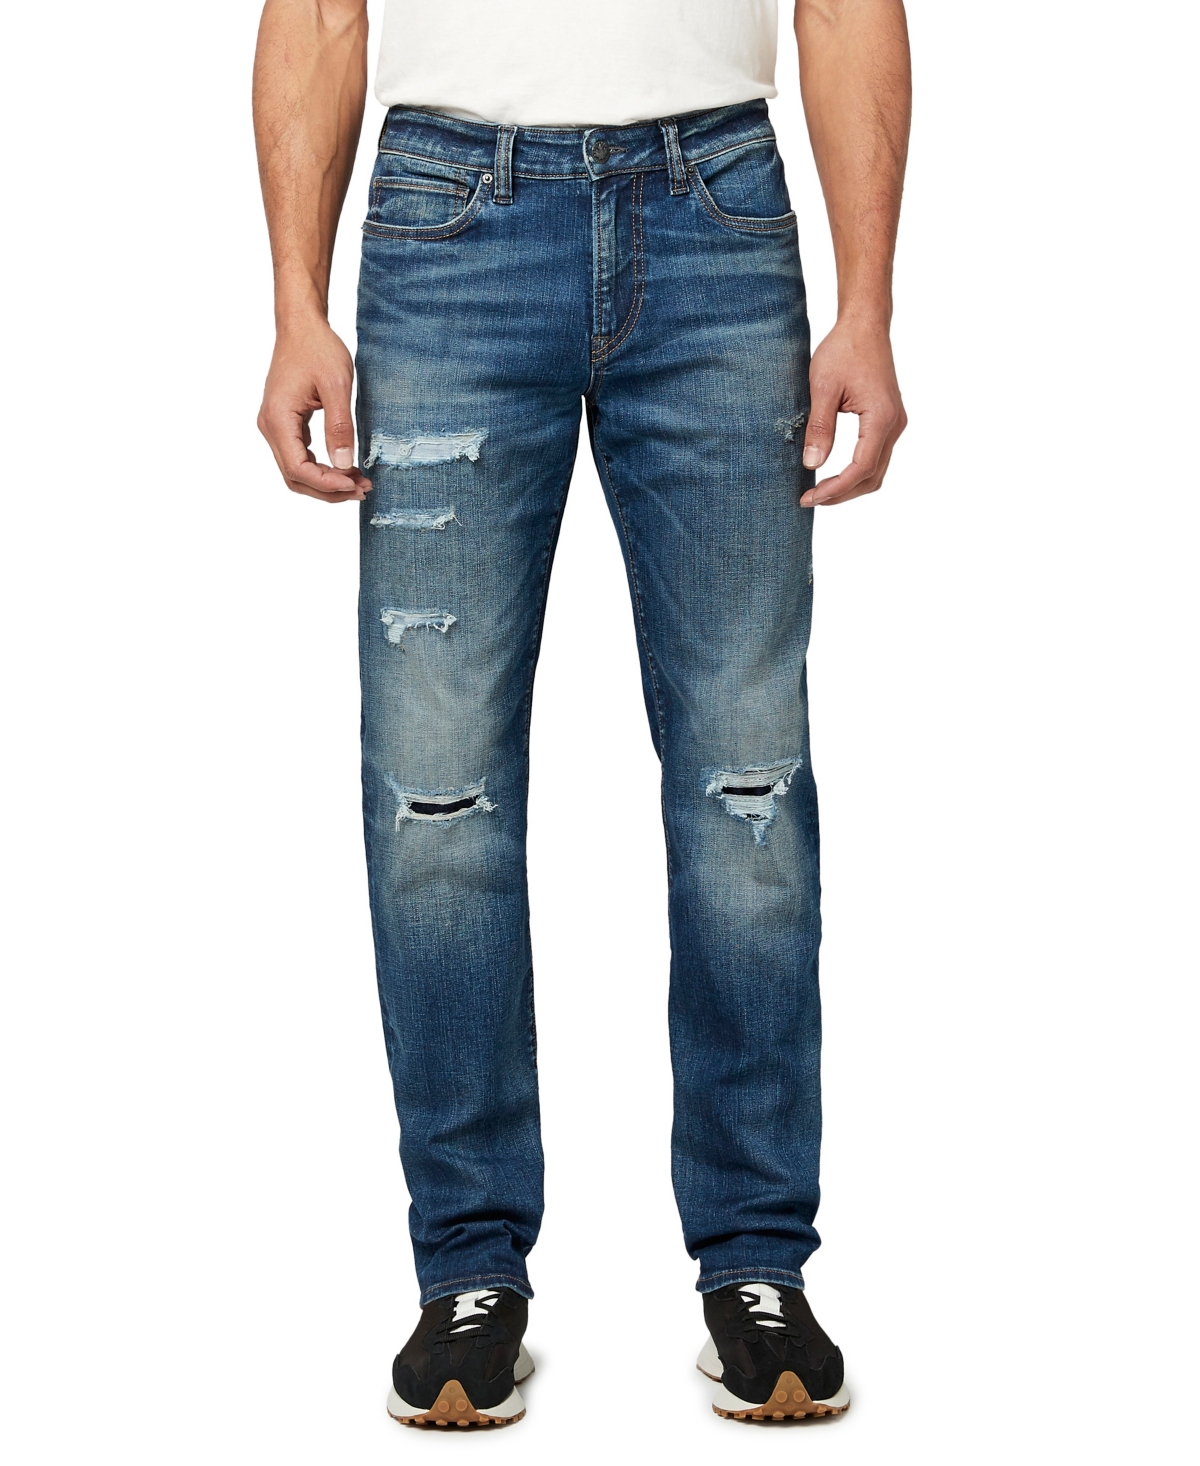 BUFFALO DAVID BITTON MEN'S REPAIRED RELAXED TAPERED BEN JEANS